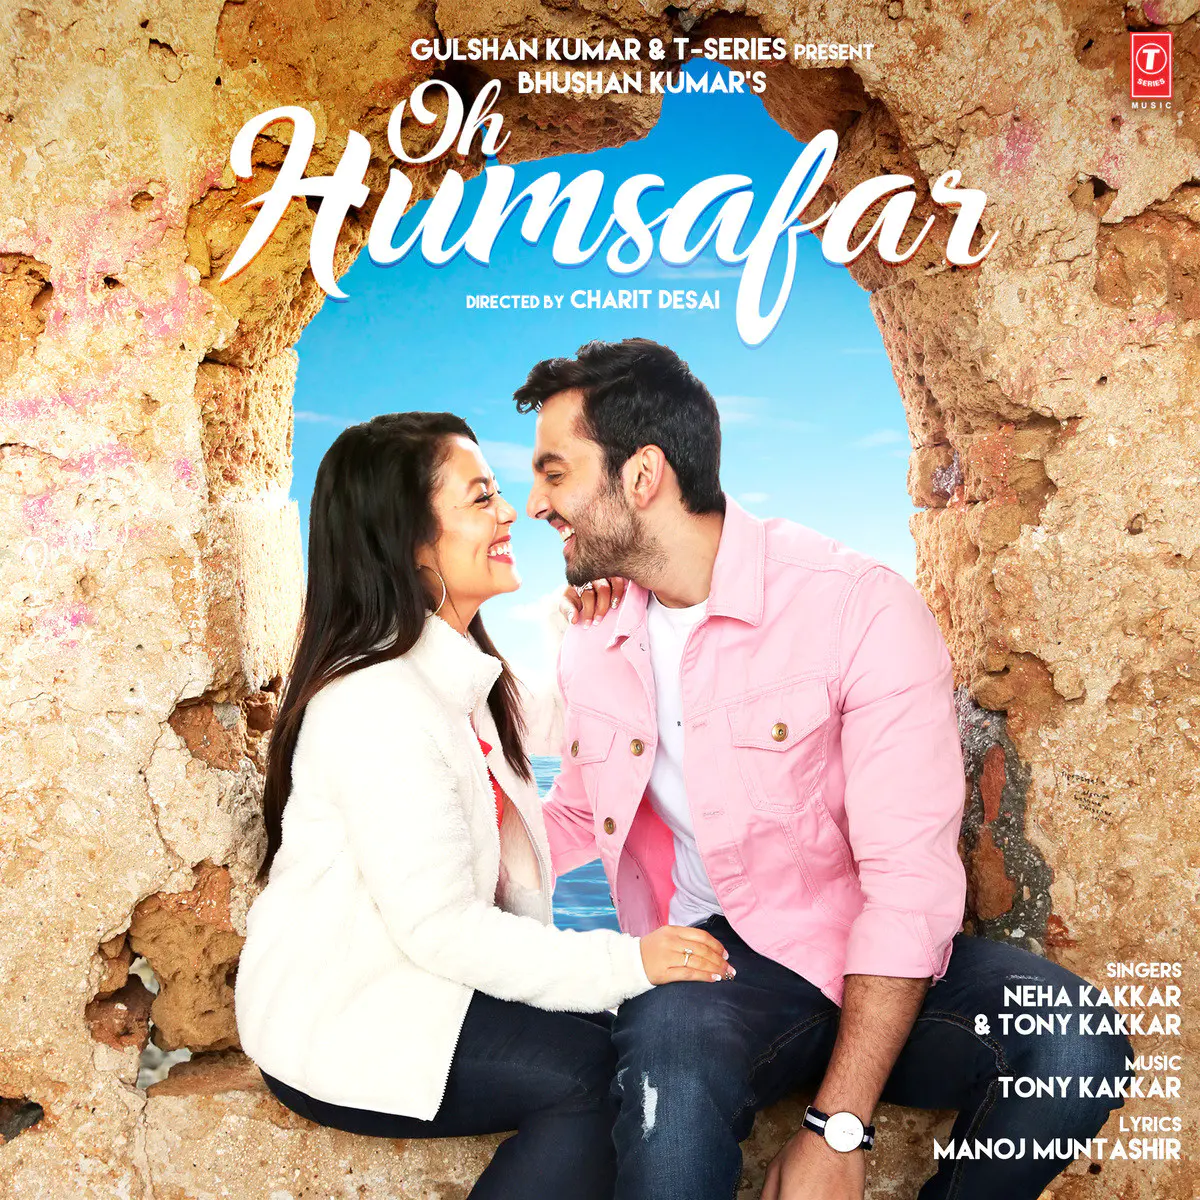 Oh Humsafar Lyrics In Hindi Oh Humsafar Oh Humsafar Song Lyrics In English Free Online On Gaana Com This means you can copy and paste it anywhere on the web or desktop applications. oh humsafar oh humsafar song lyrics